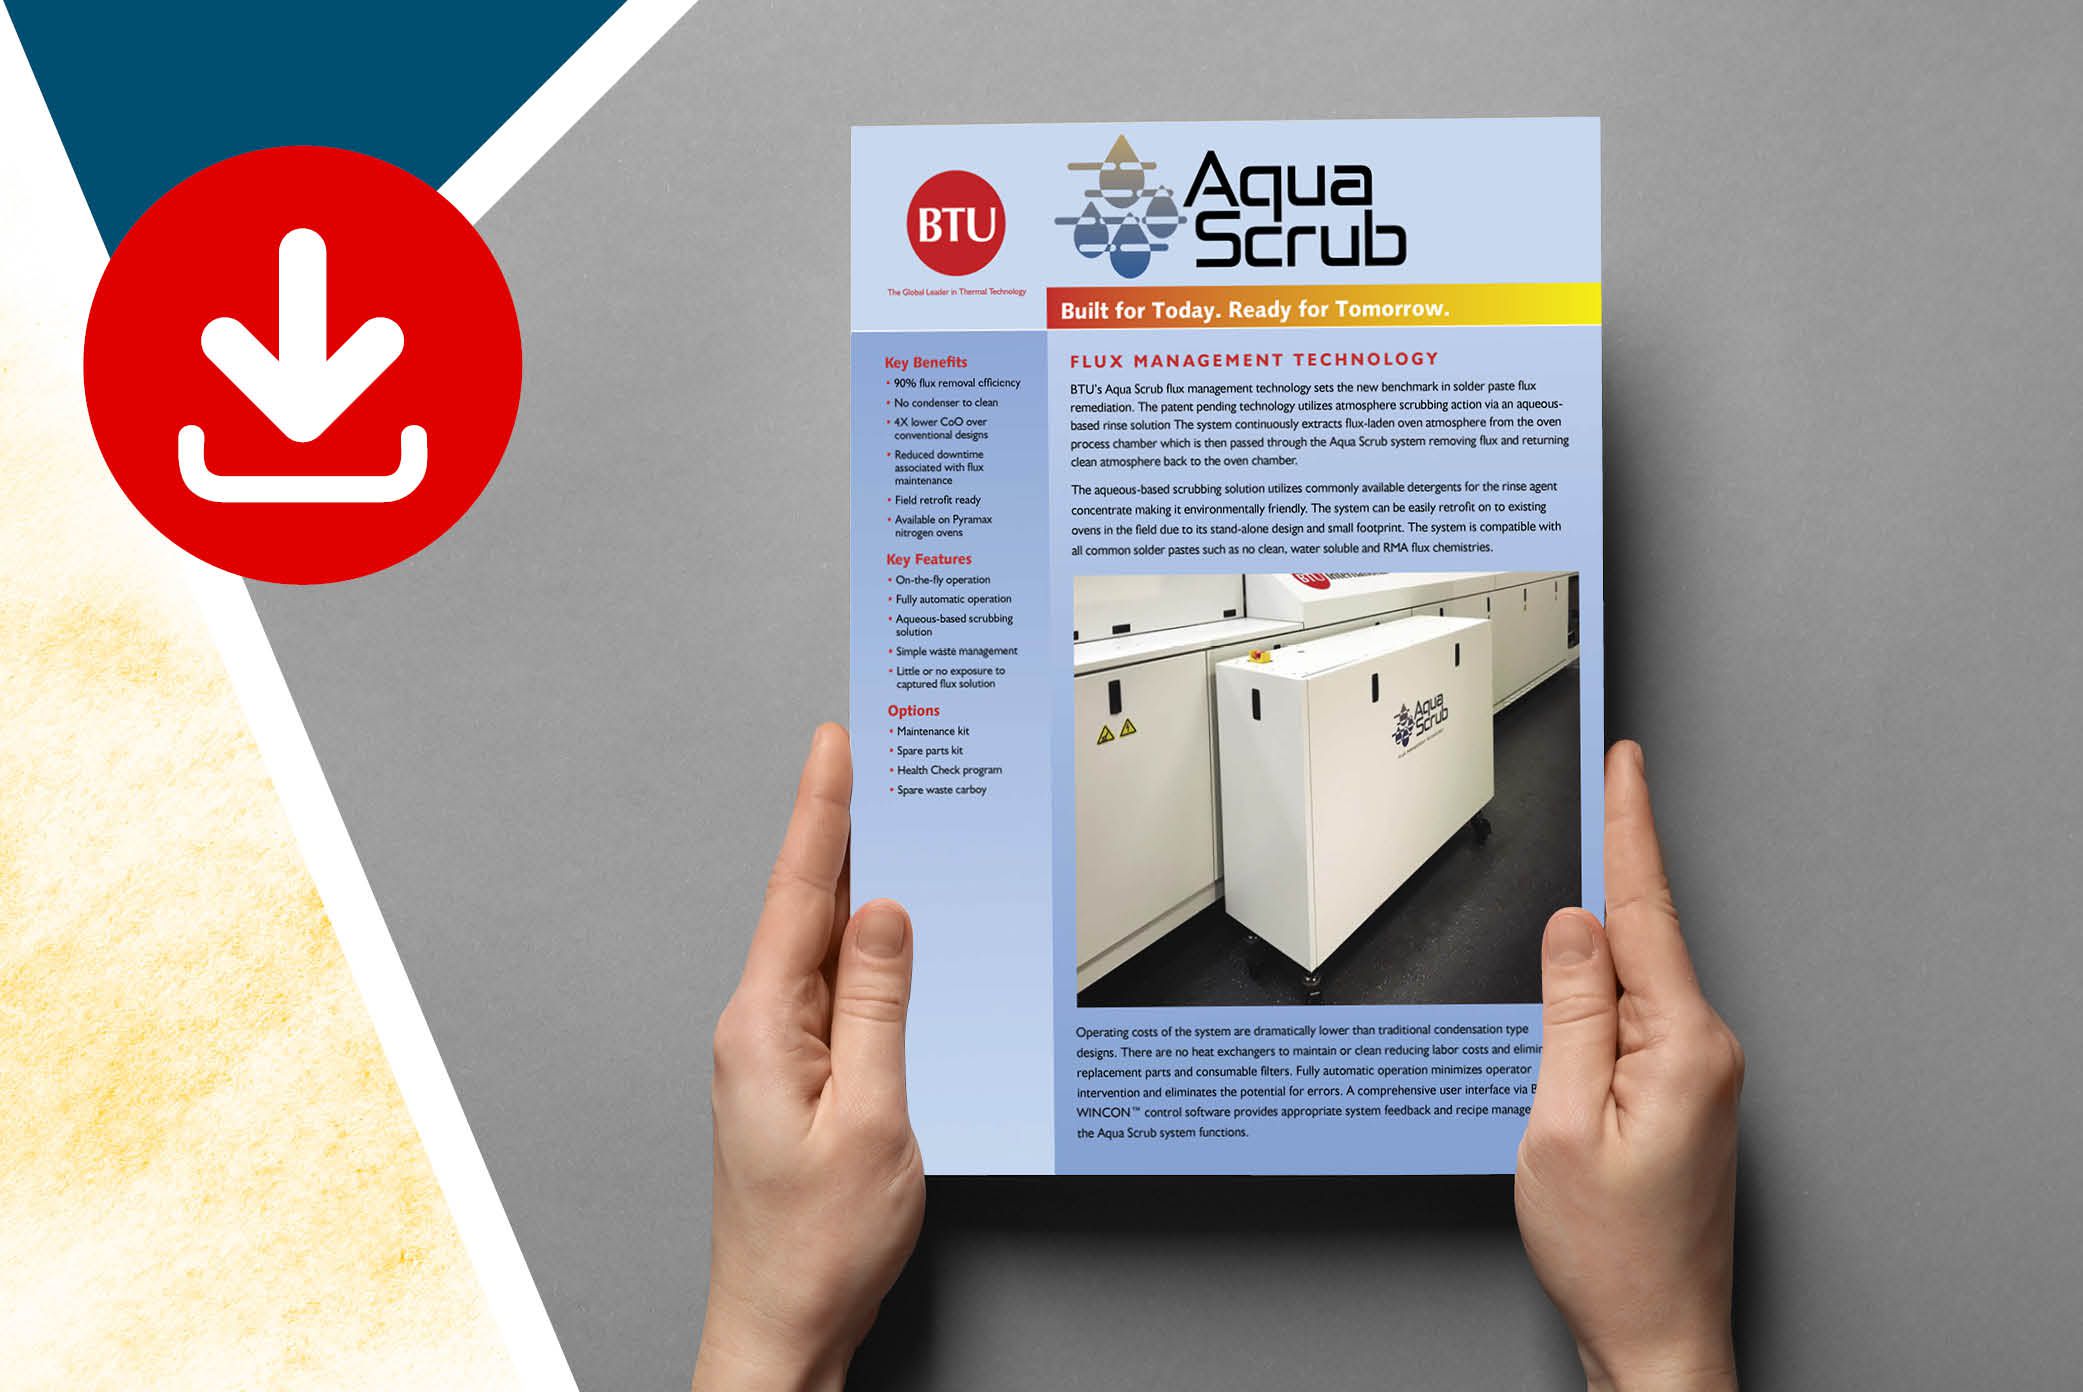 Aqua scrub is flux management with reflow oven 